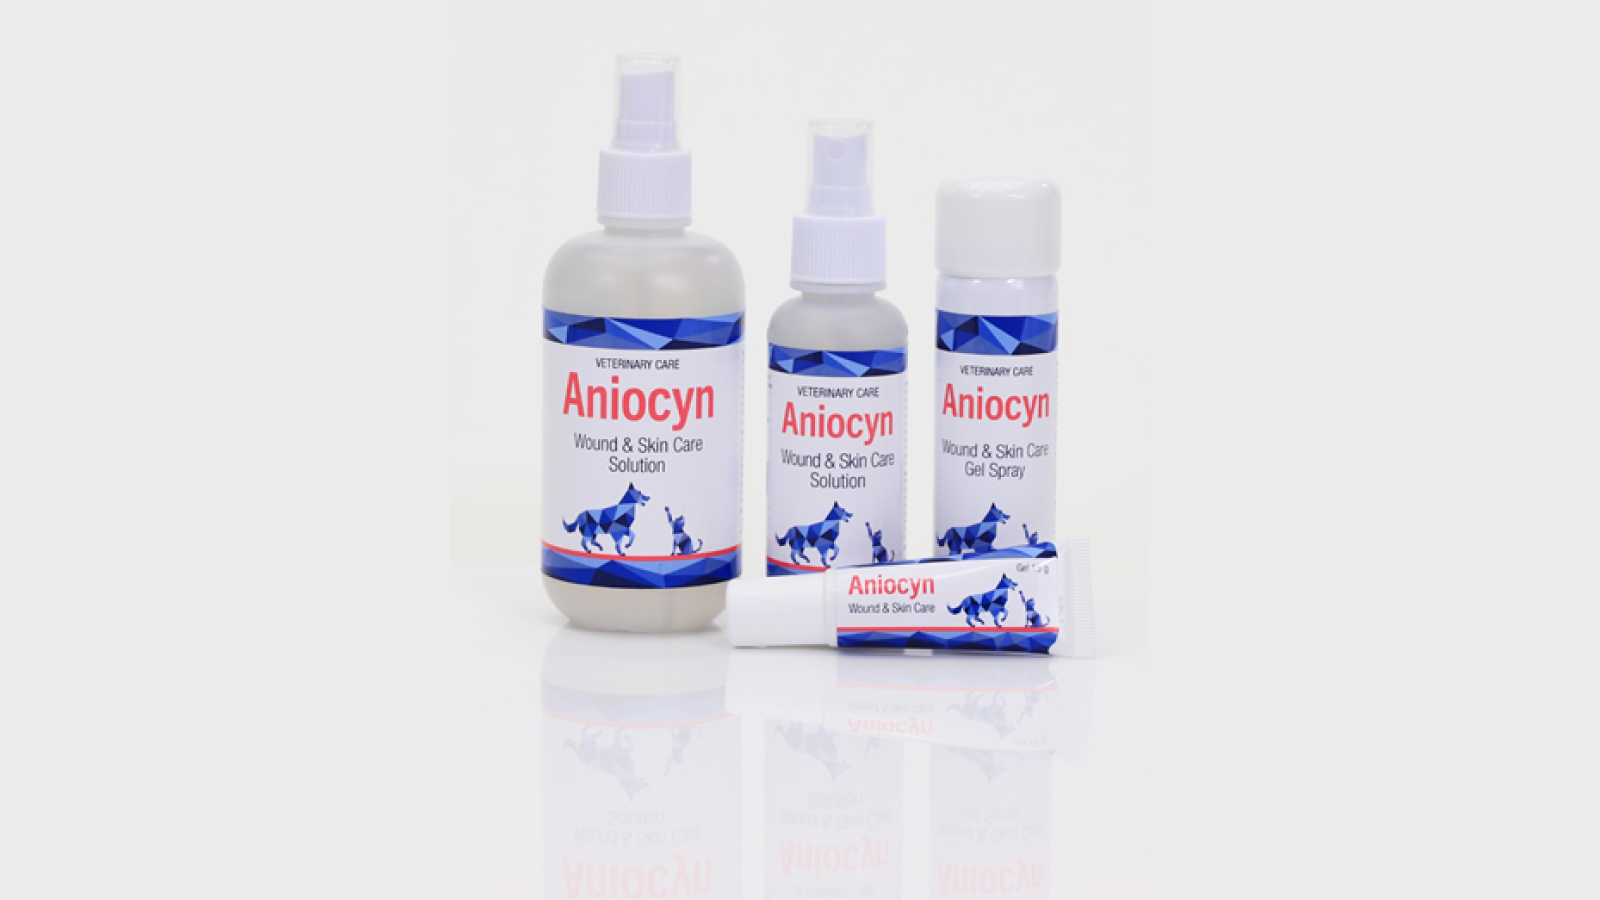 When to use Aniocyn